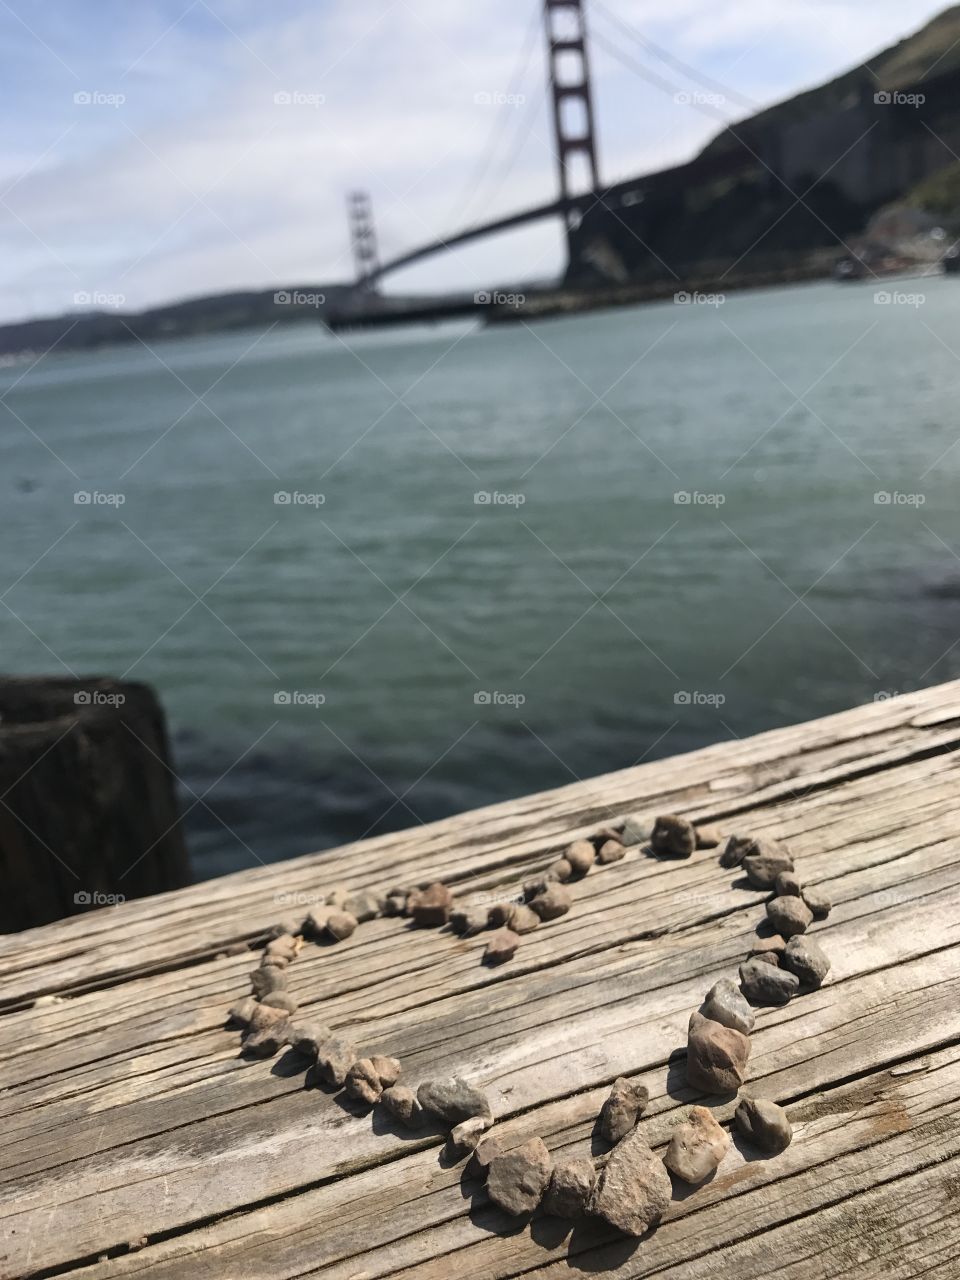 Heart design with pebbles, Golden Gate Bridge in the background in San Francisco California 